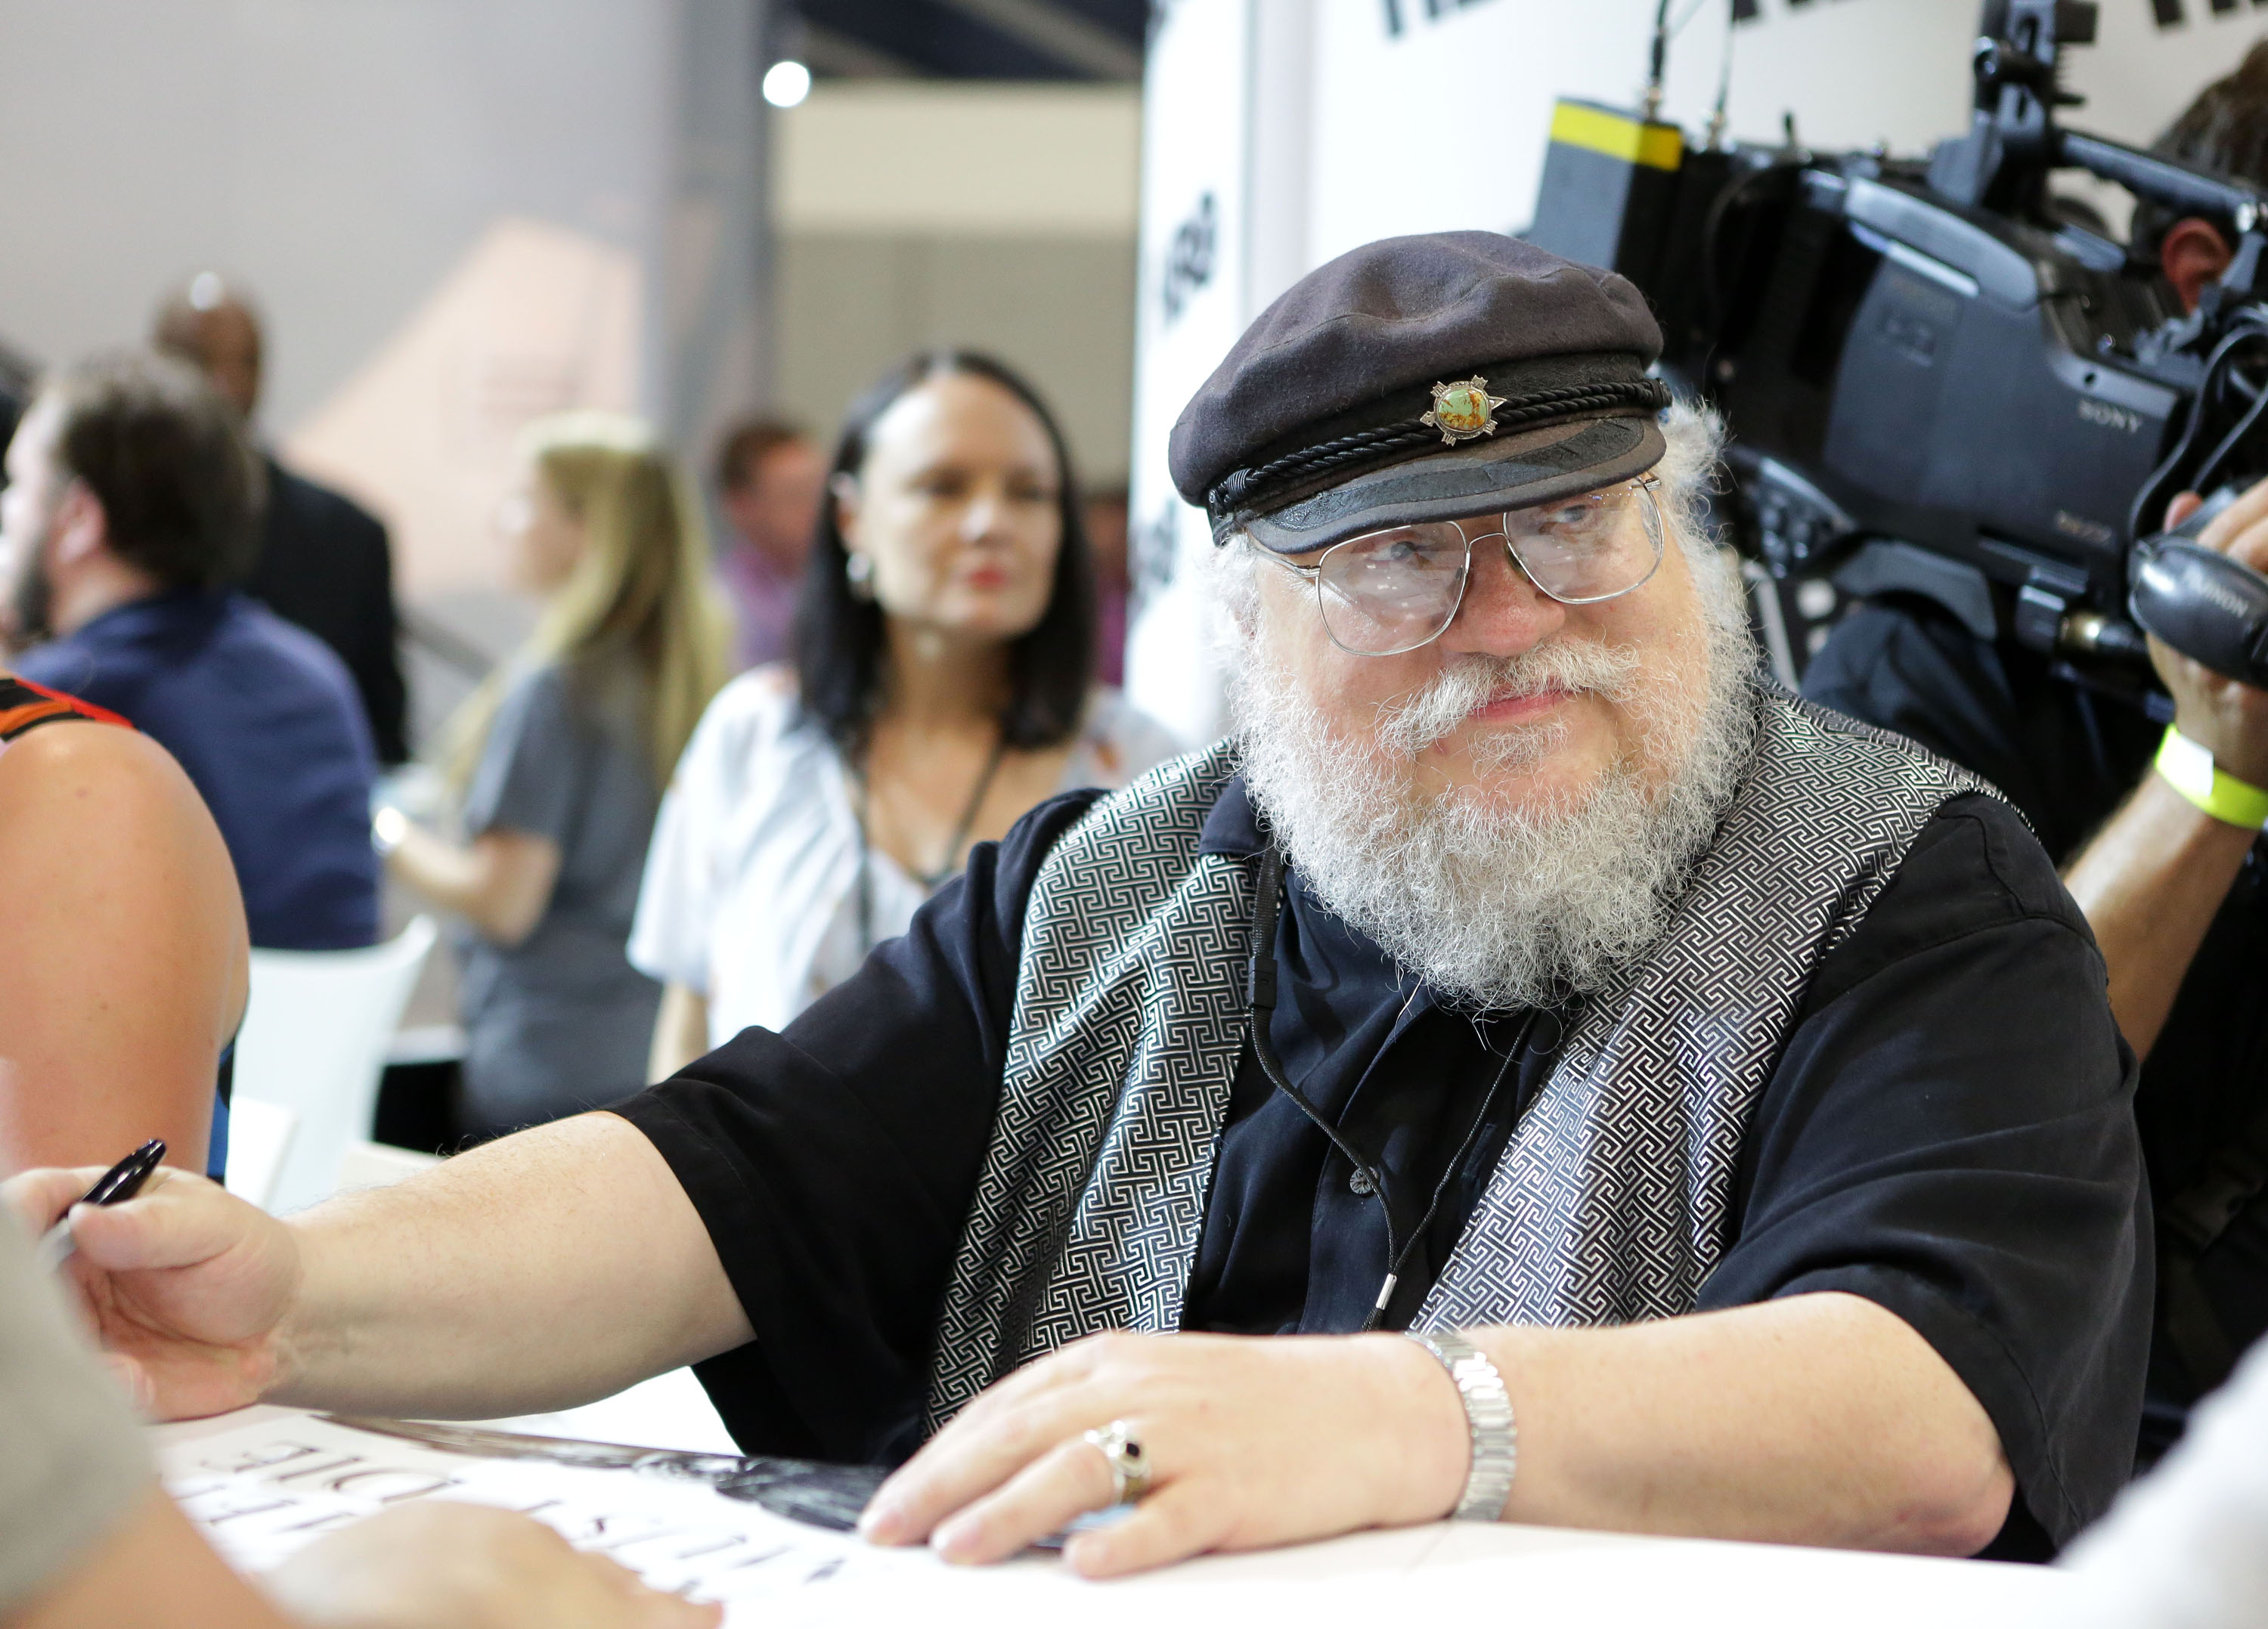 George R.R. Martin signs autographs during the 2014 Comic-Con International Convention. (Tiffany Rose&mdash;Getty Images)